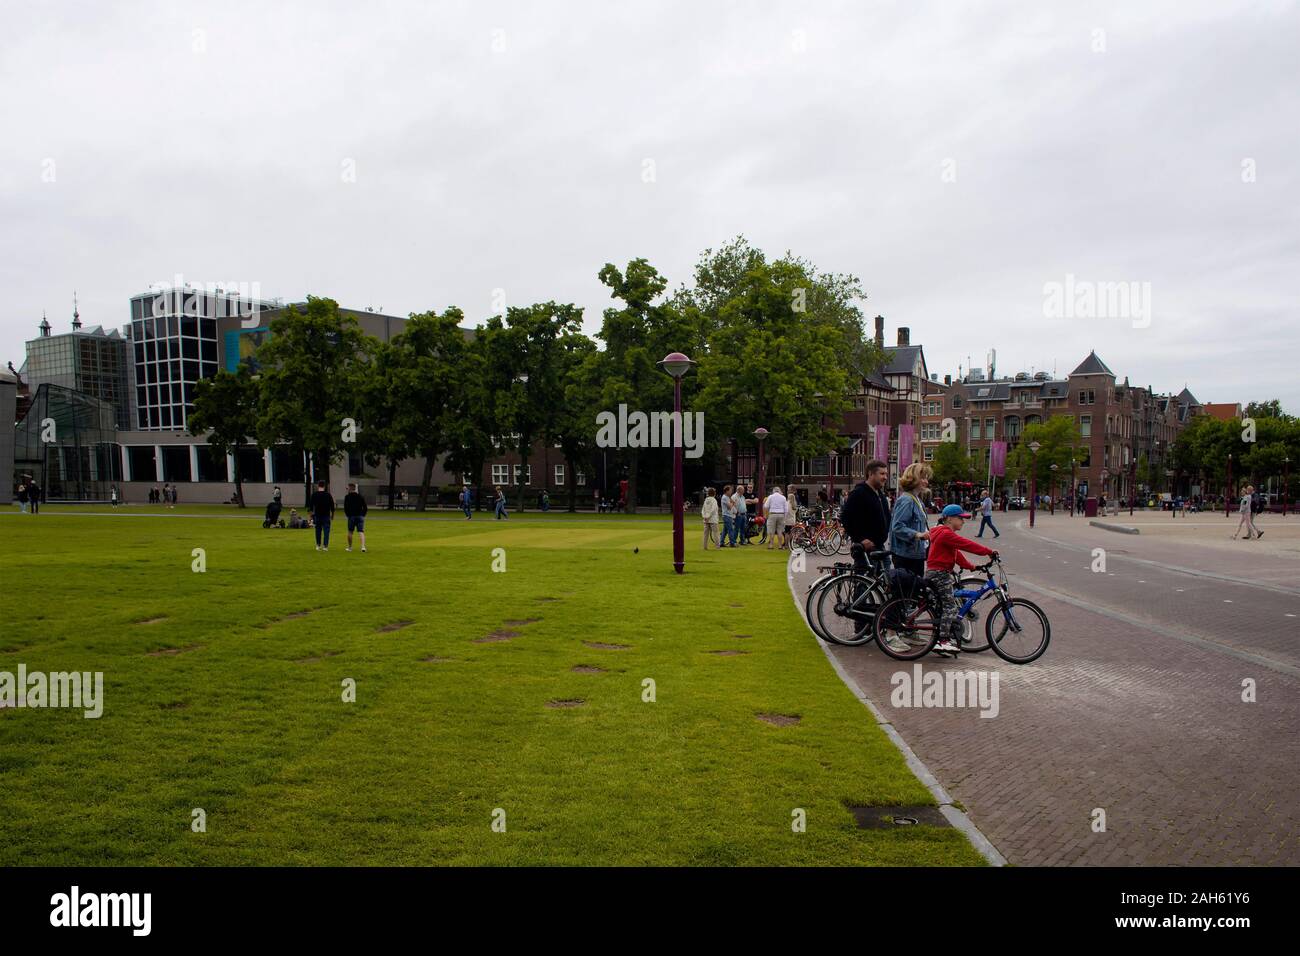 View of people at hanging out and a family riding bicycles at Museum Quarter (square) in Amsterdam. It is a summer day with cloudy sky. Stock Photo